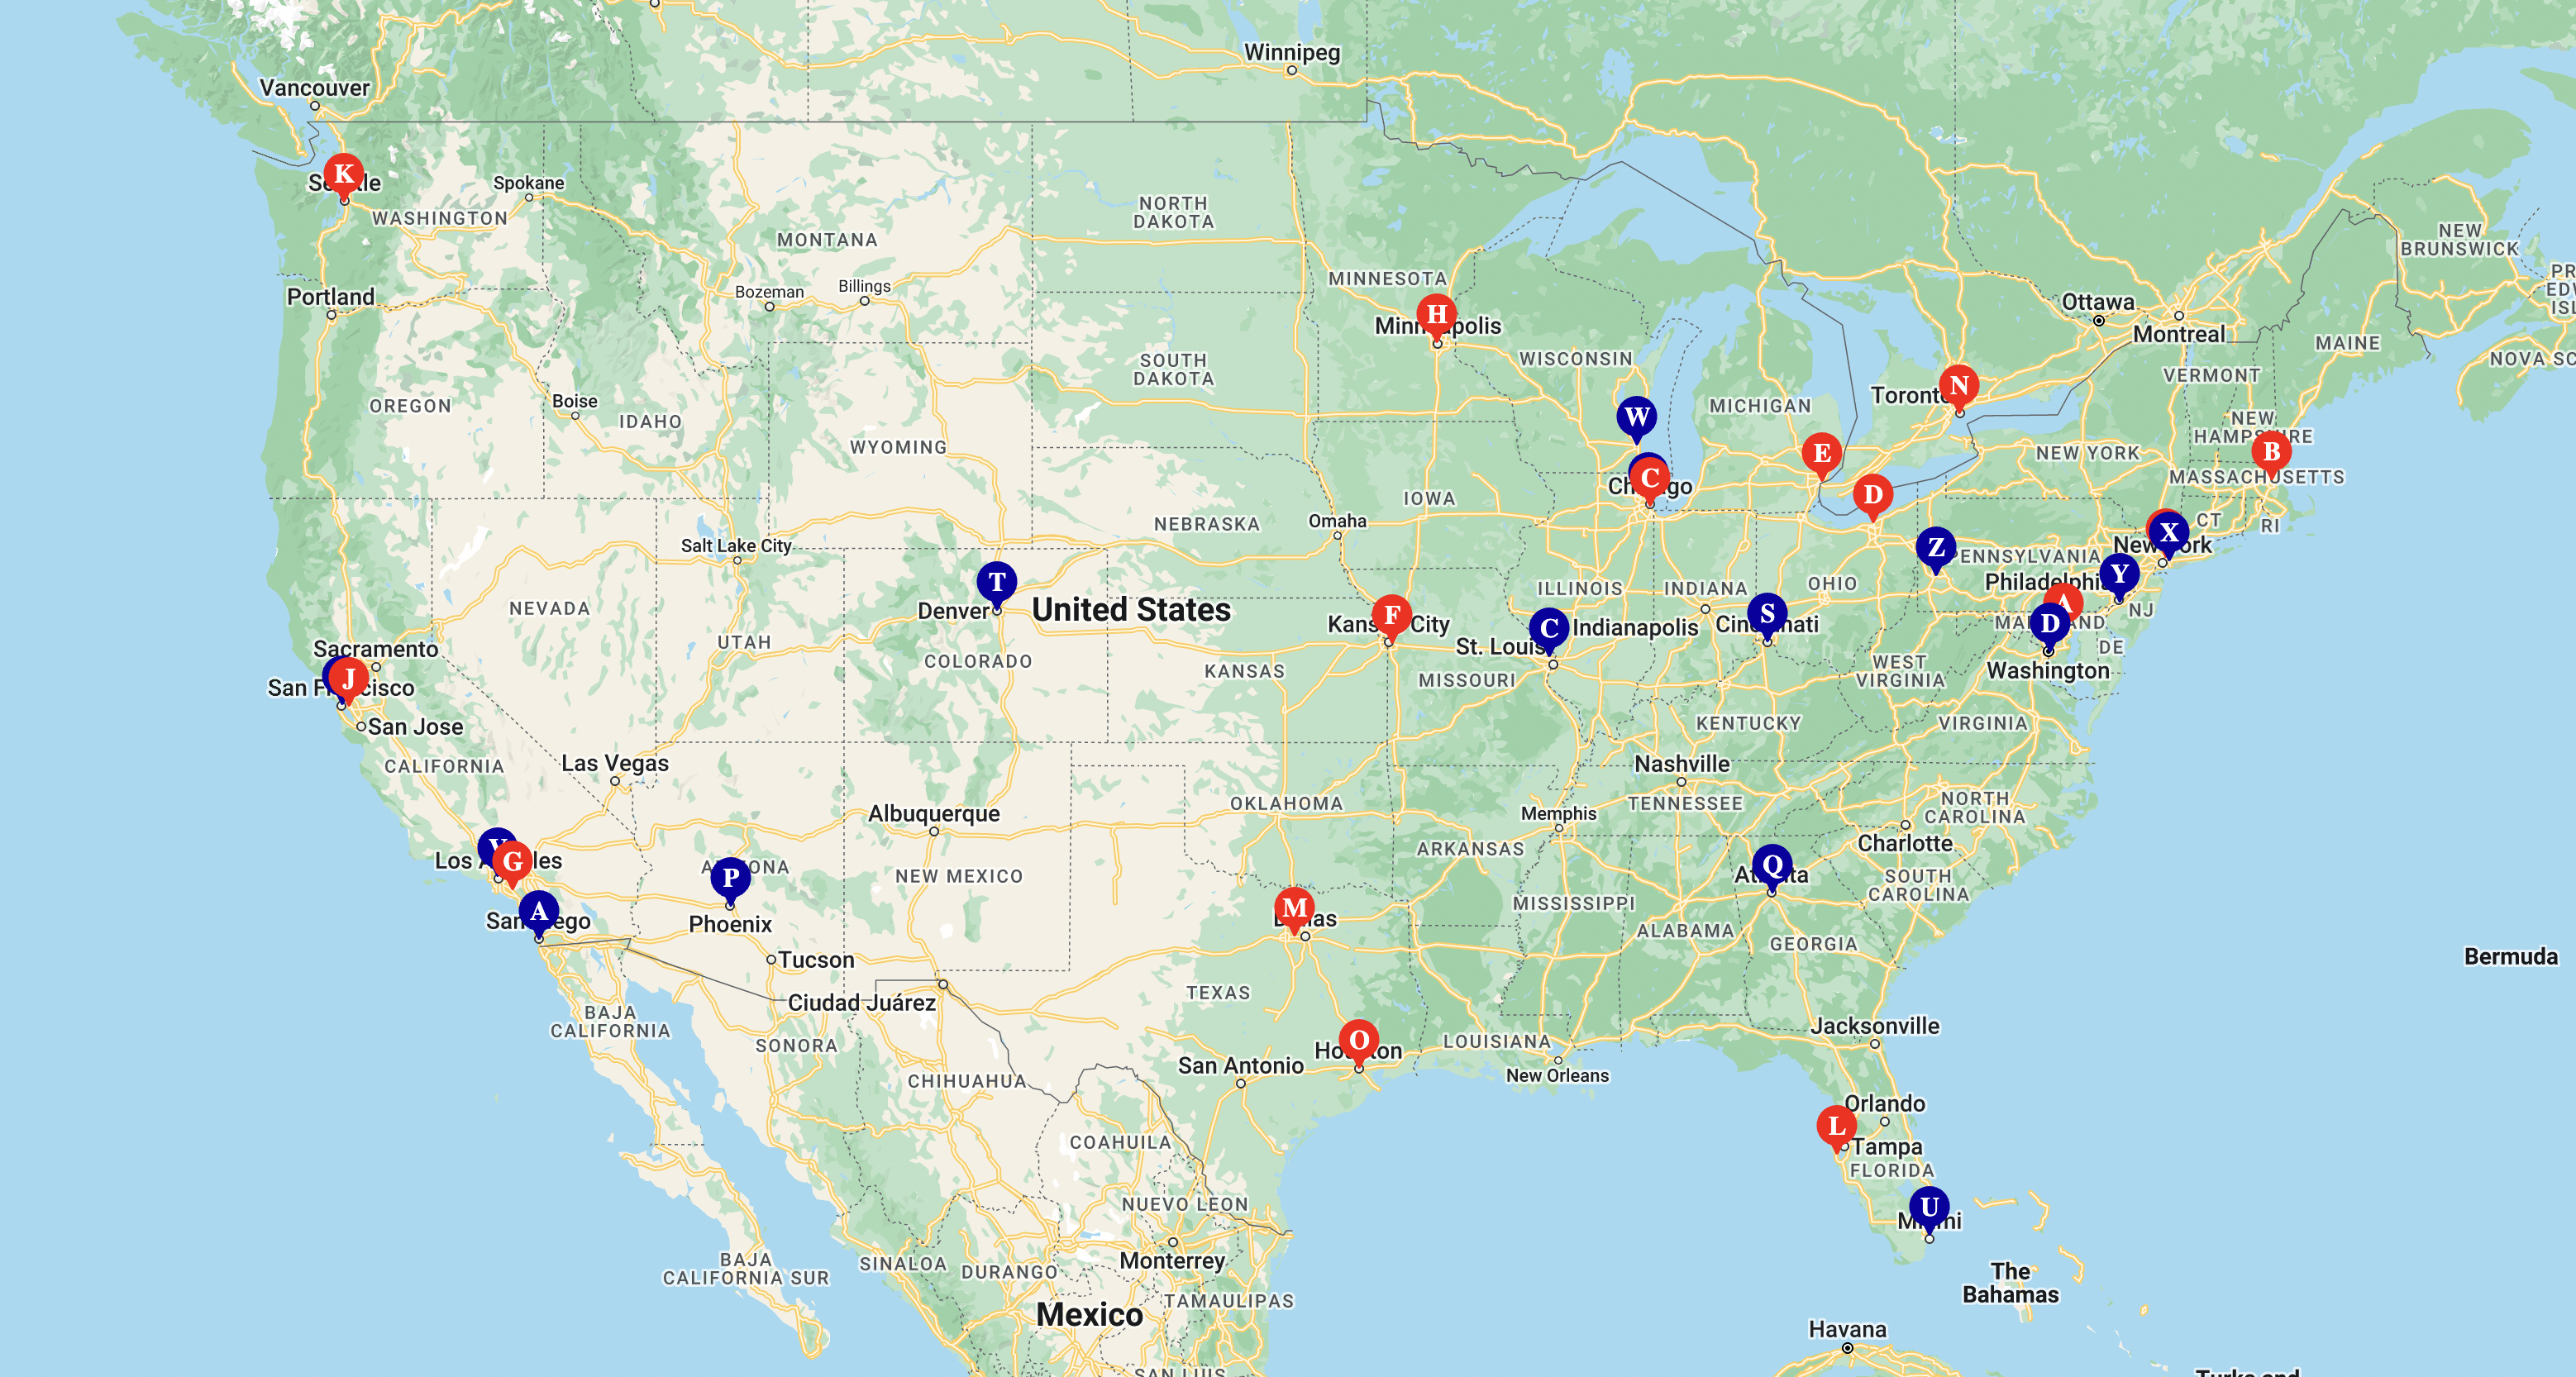 Pin map of Major League Baseball stadiums made with Mapize's geo-mapping software.